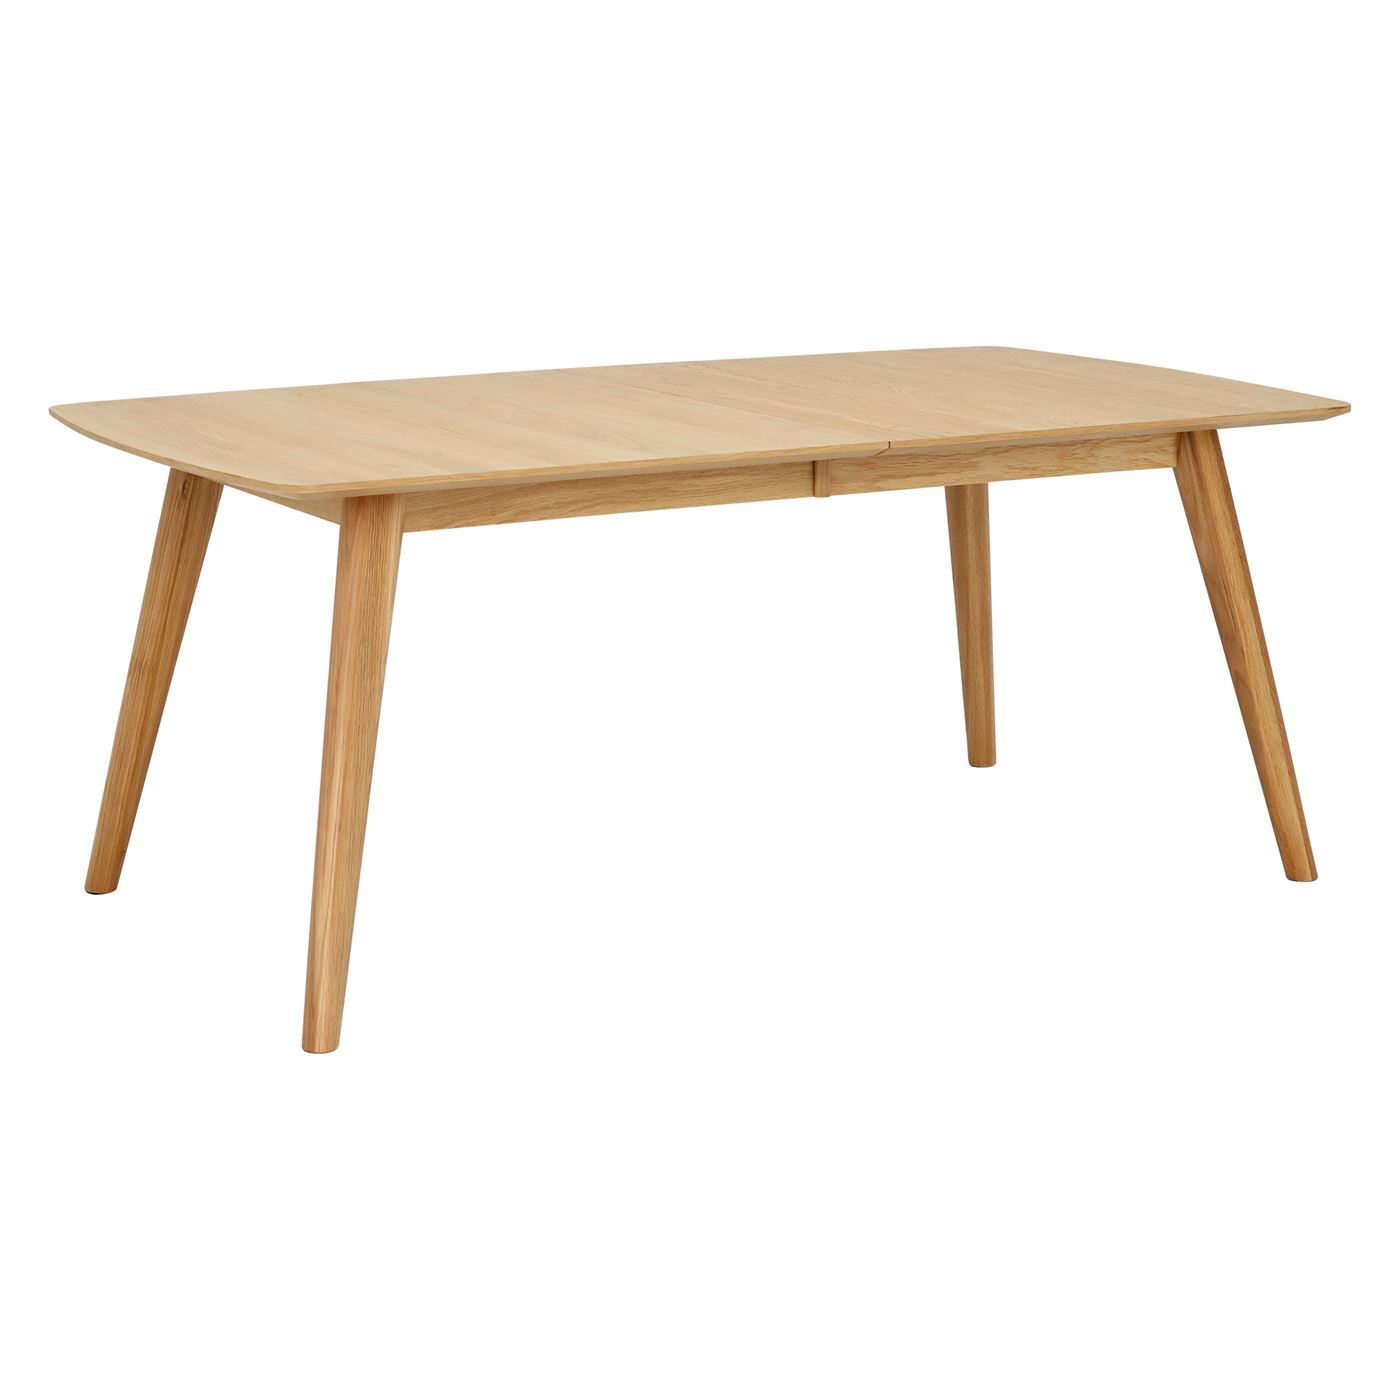 Lund Extending Dining Table 180cm, Neutral | Barker & Stonehouse